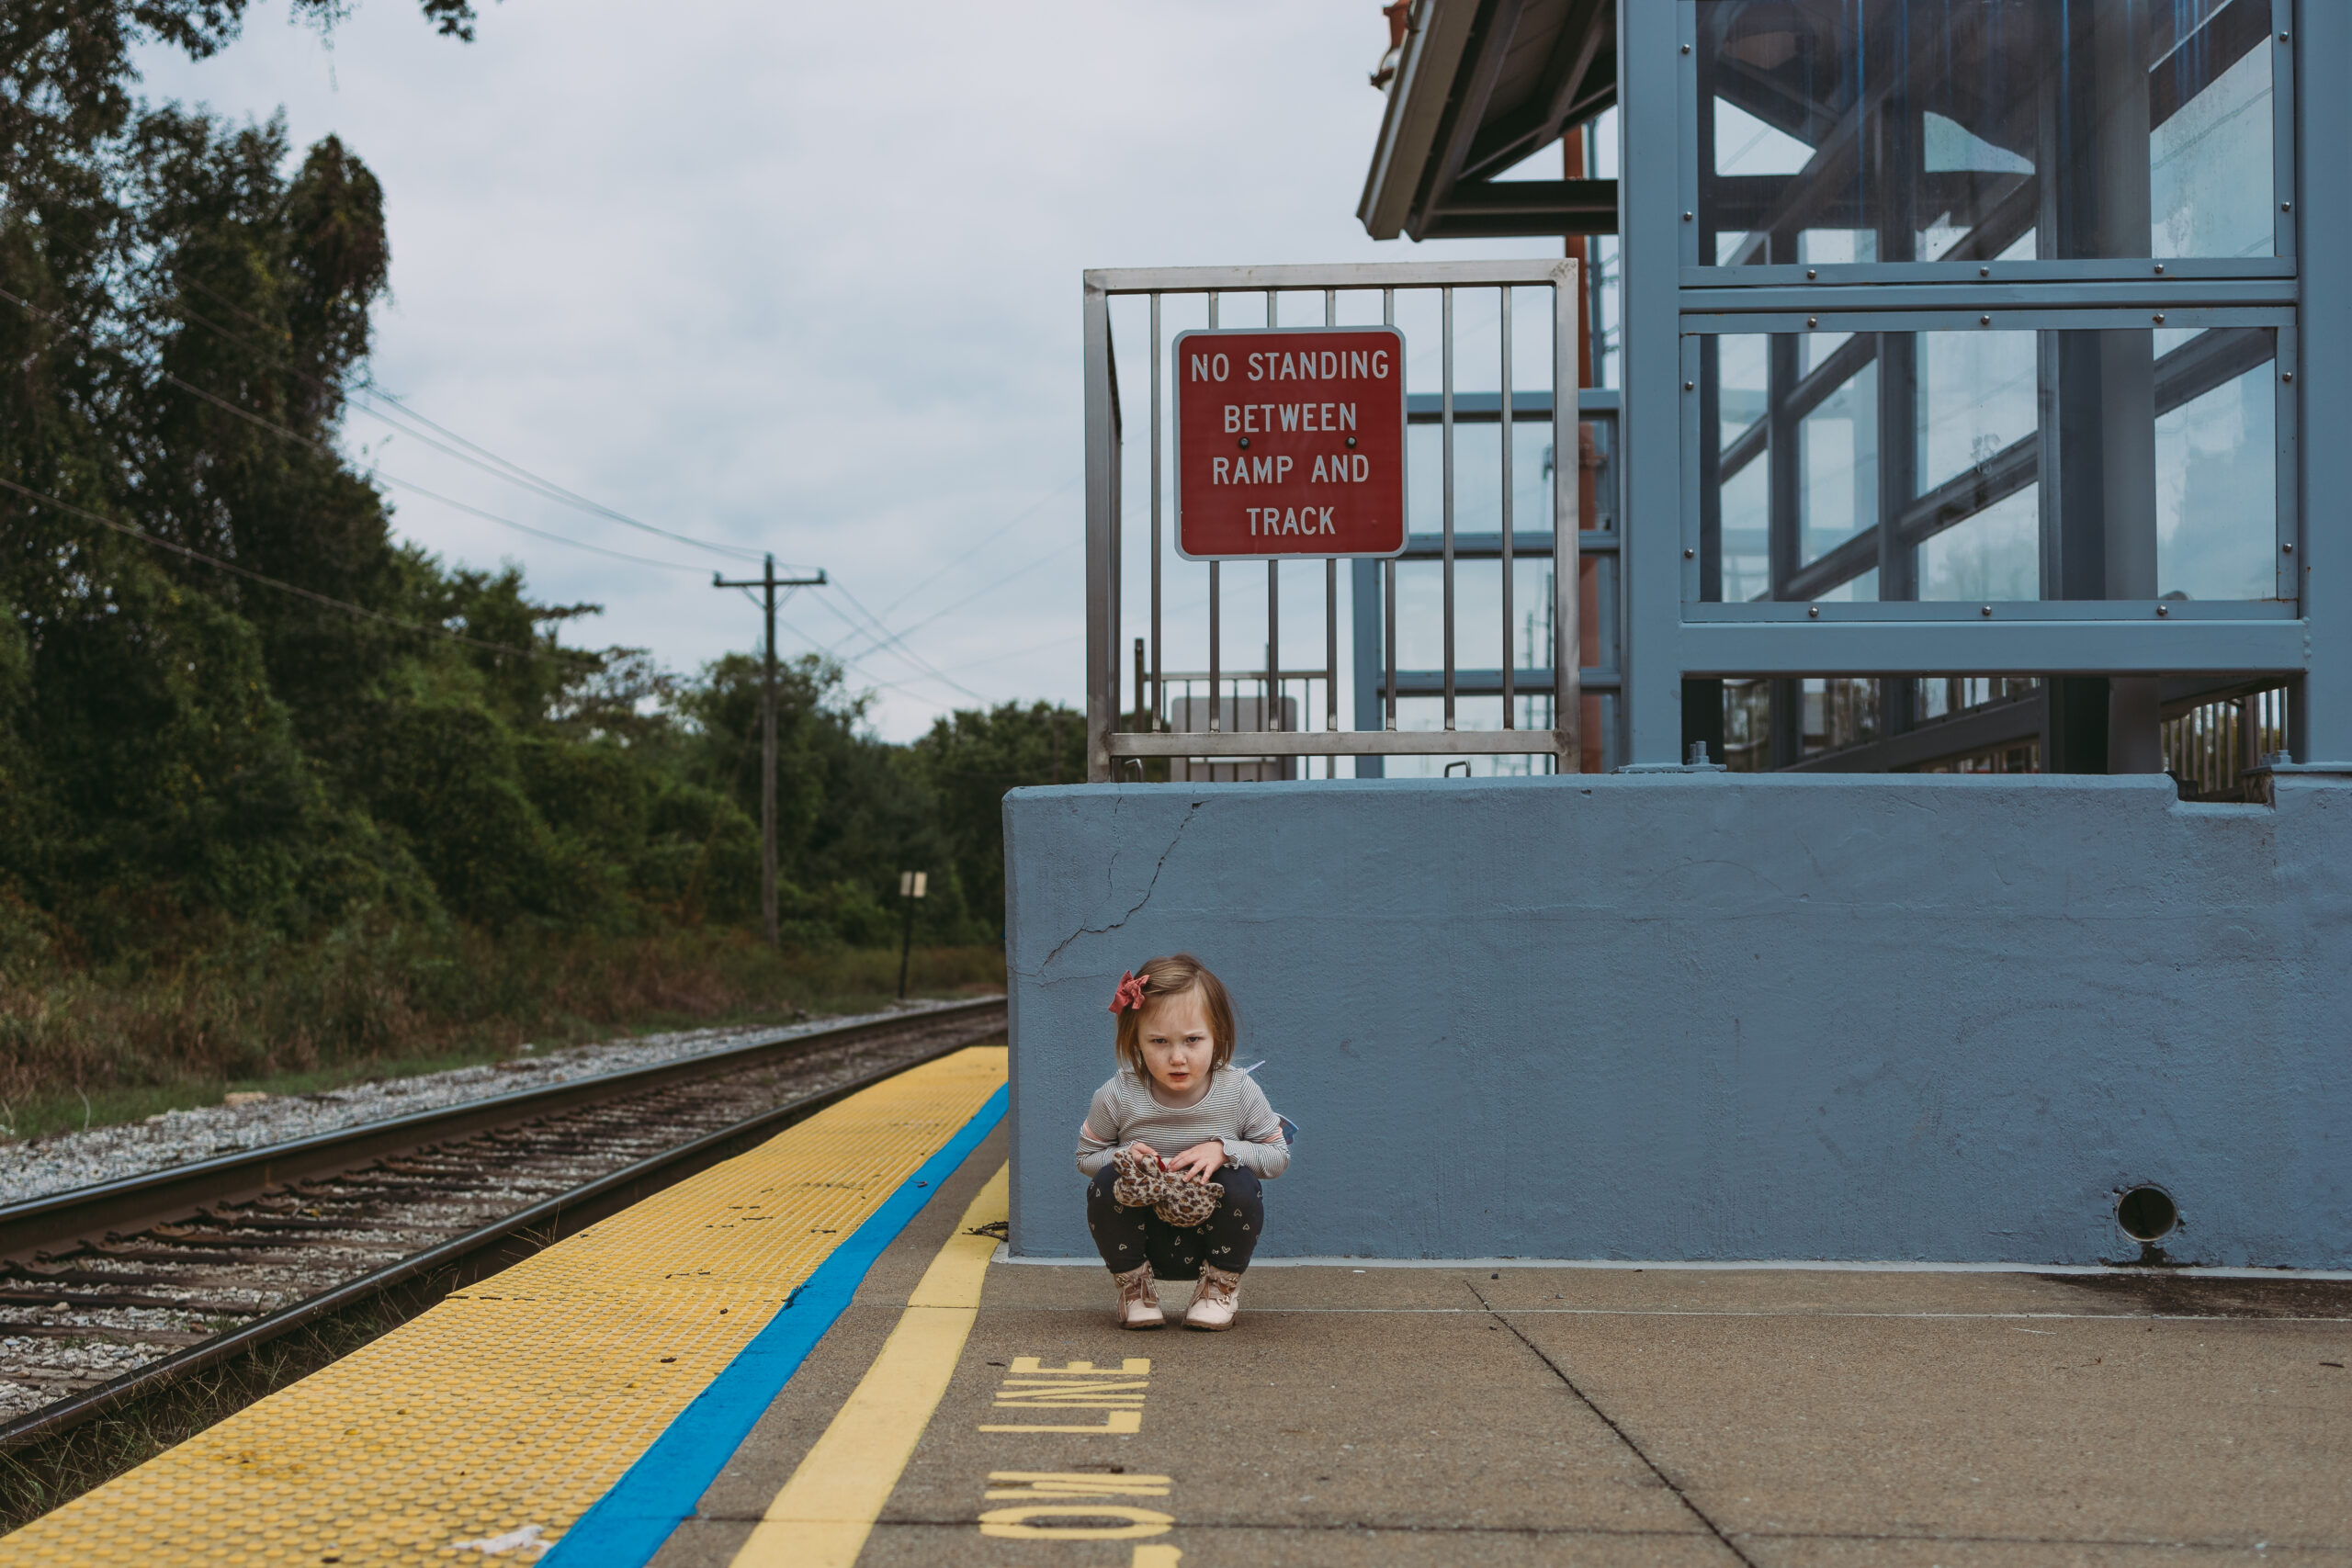 January Member Photo Challenge Winner - child at a train station